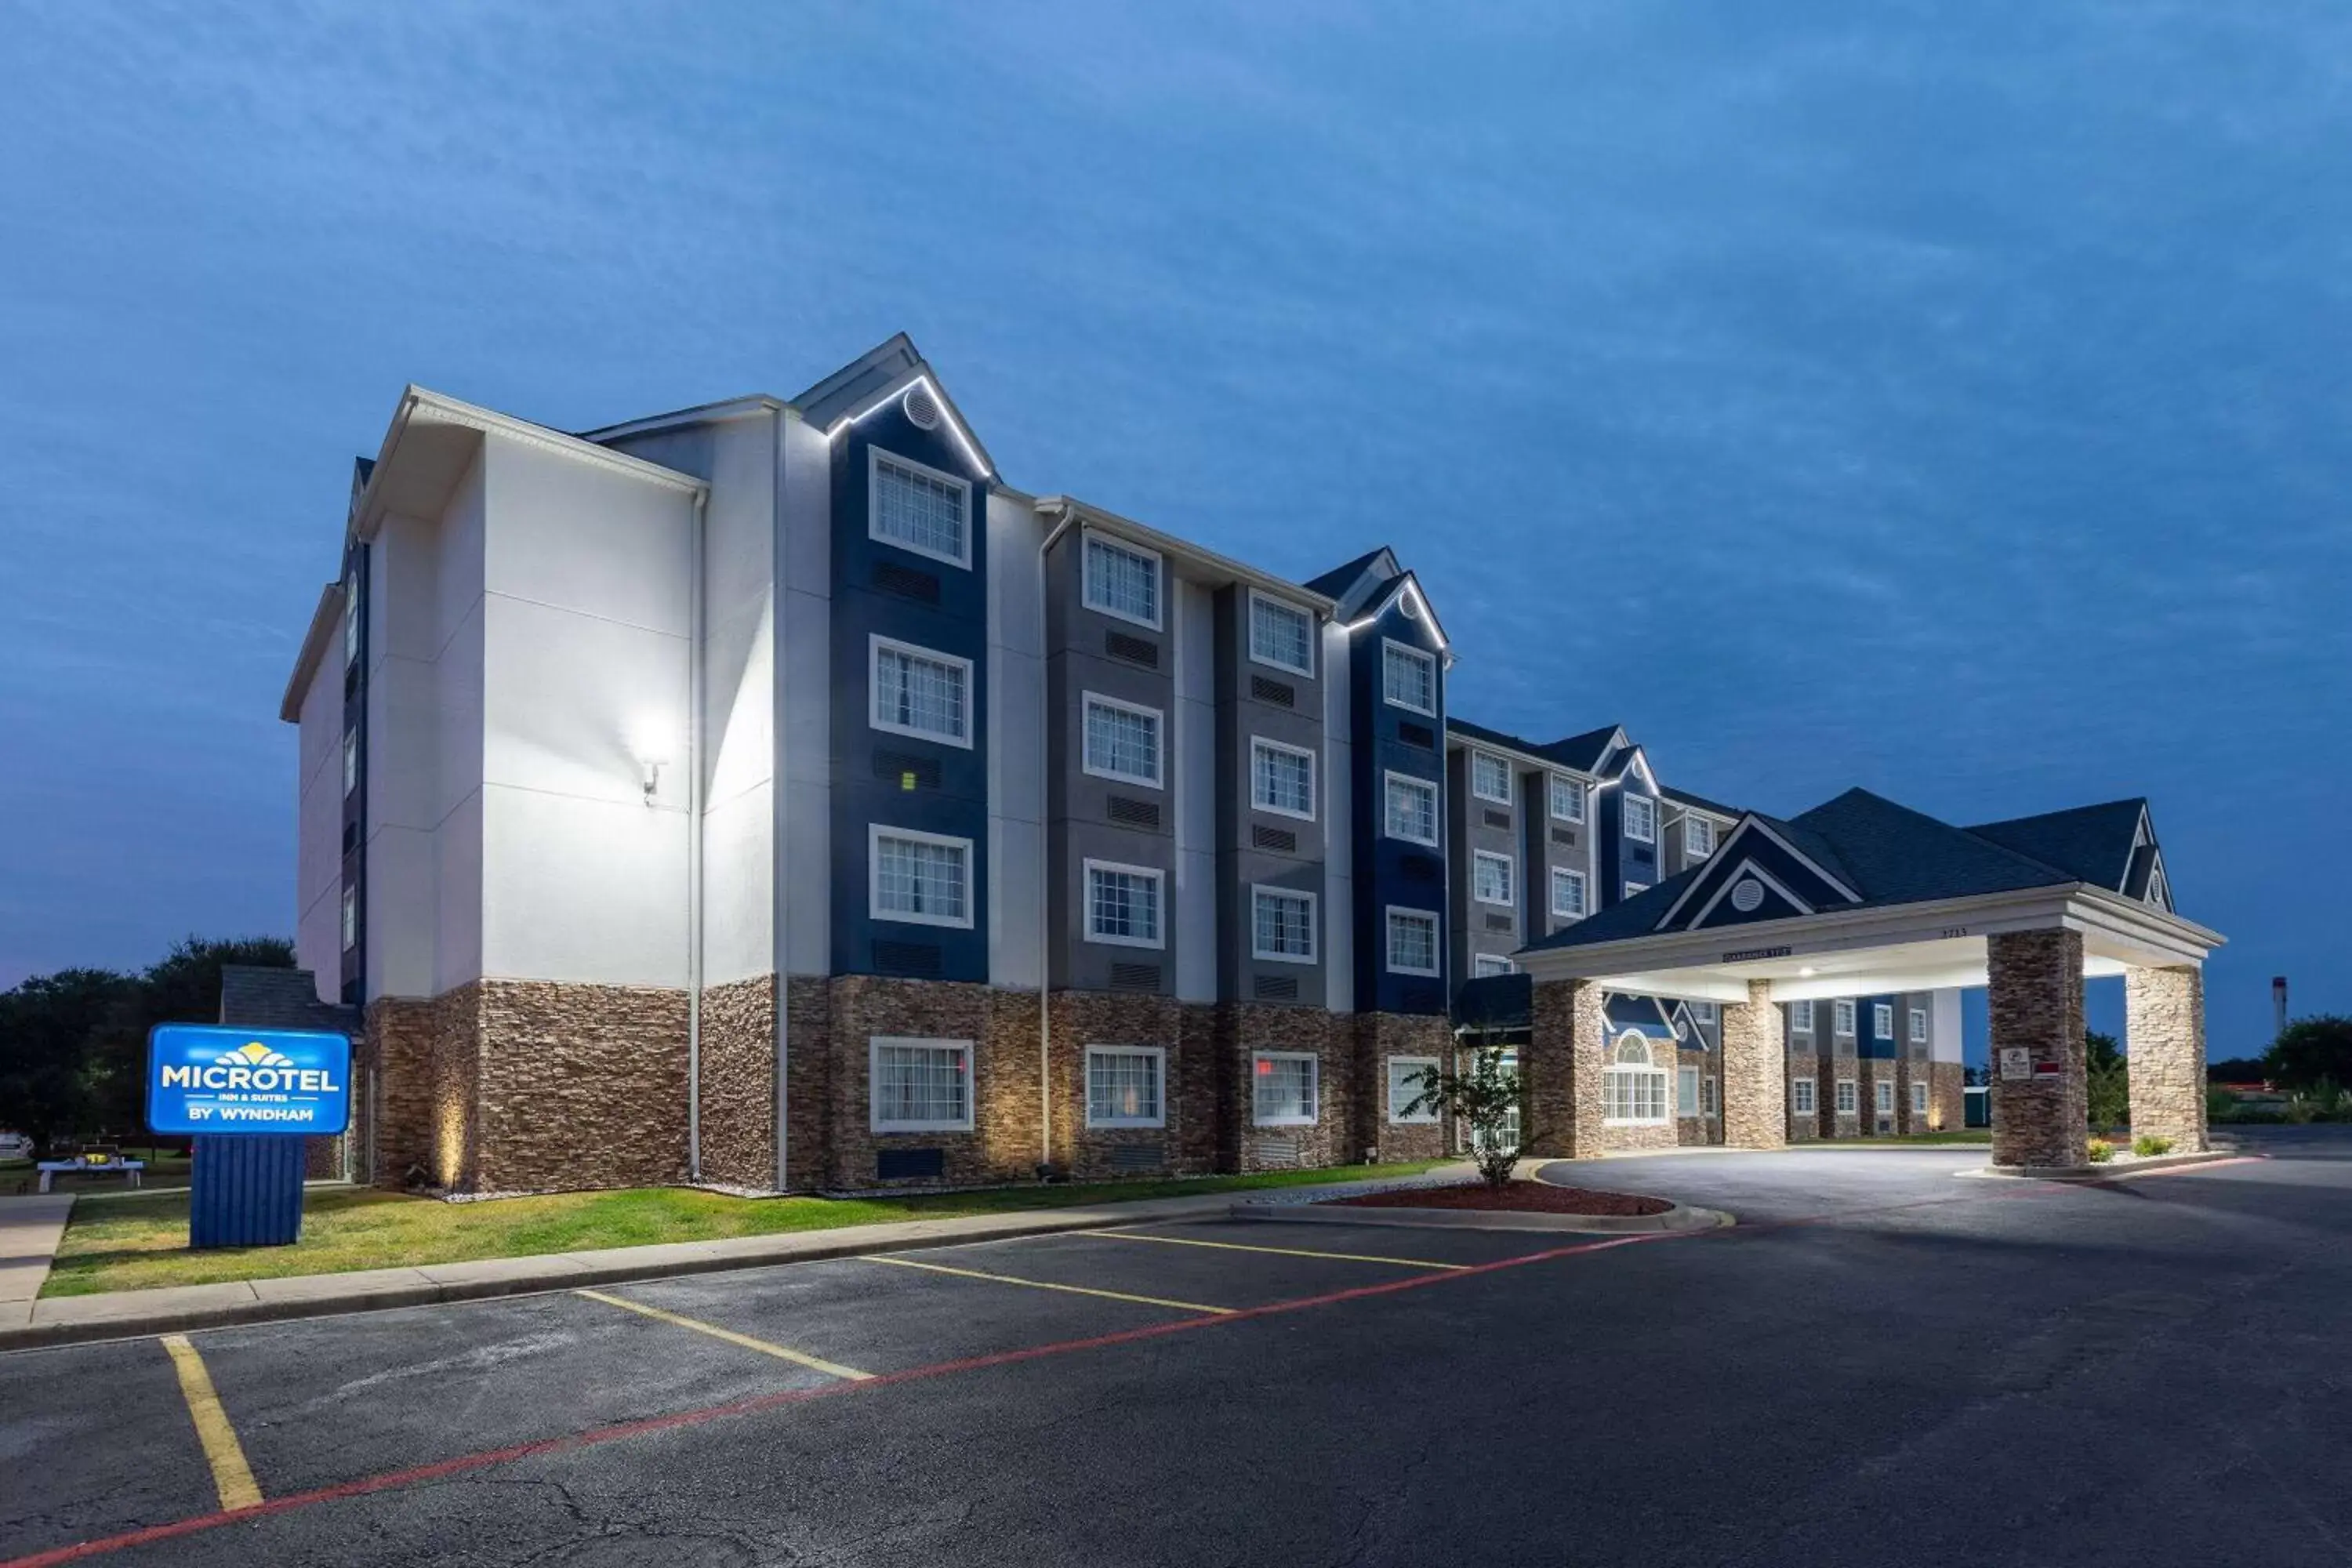 Property Building in Microtel Inn & Suites by Wyndham Bossier City